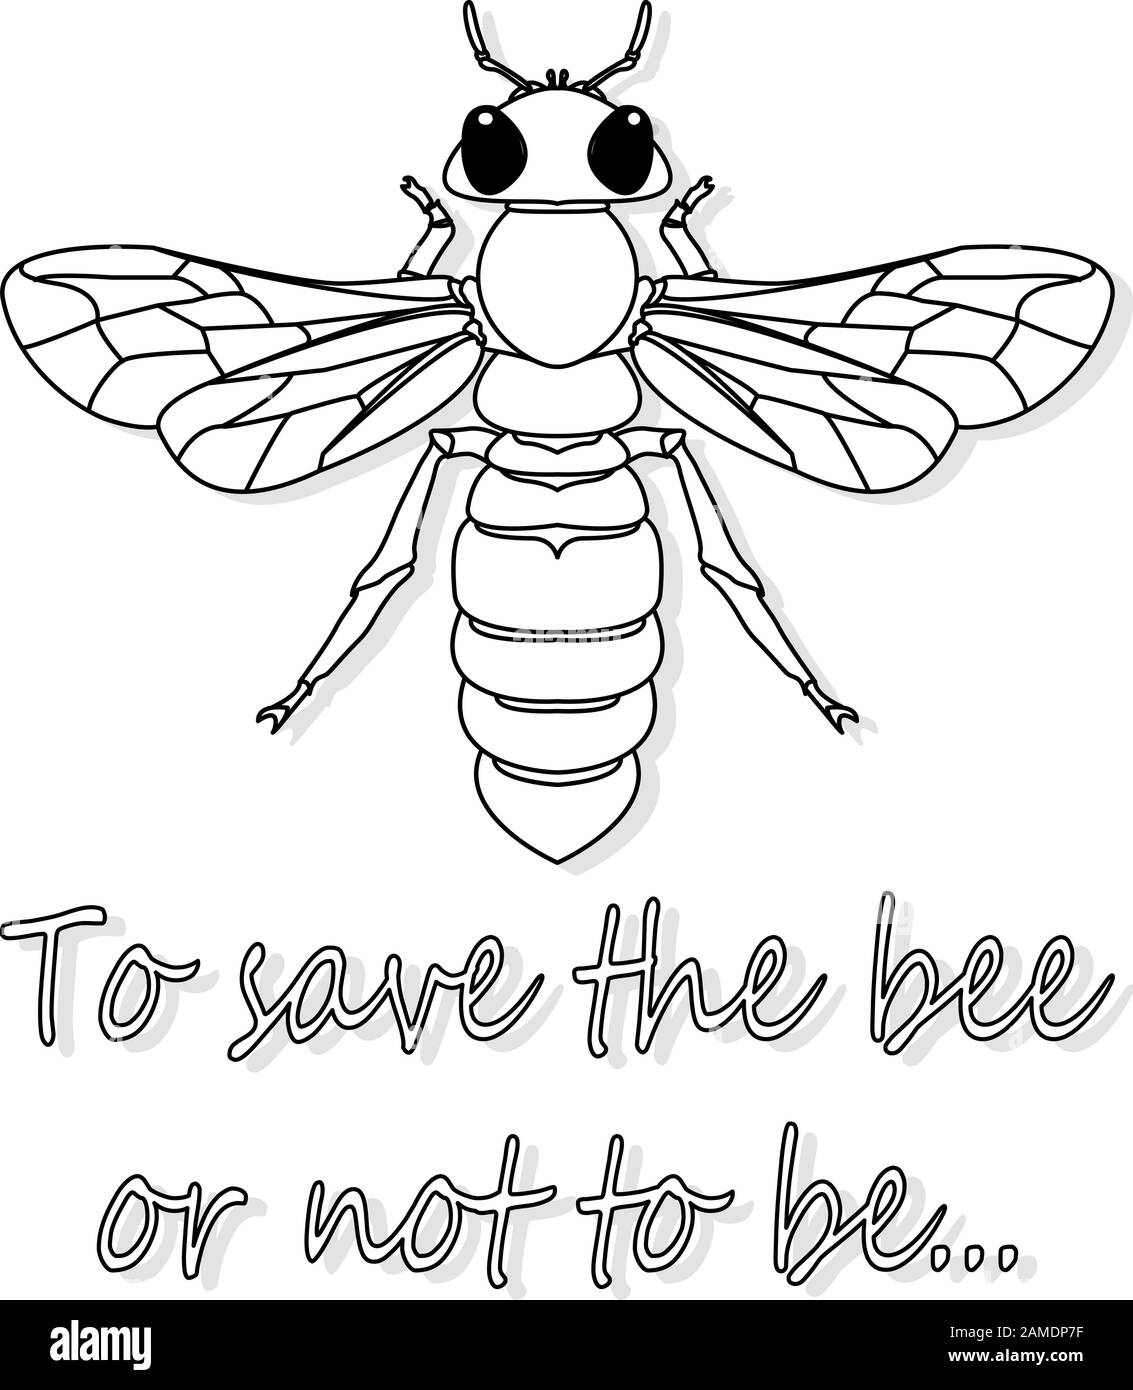 Bee monochrome illustration - vector text quotes and bee drawing. Lettering poster or t-shirt textile graphic design. Stock Vector